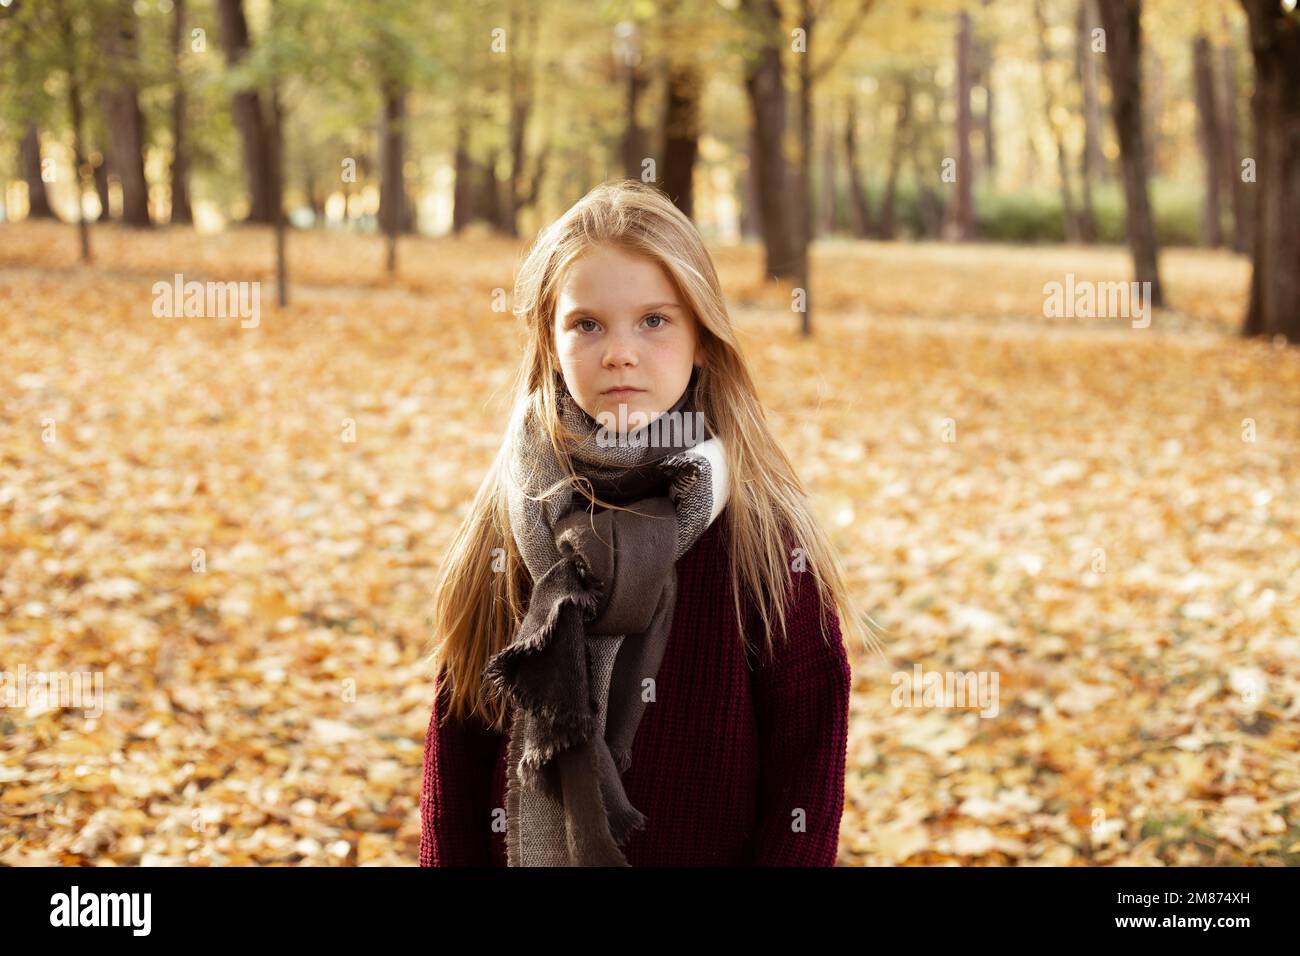 Serious calm sad little blond girl look at camera, wear warm jacket and scarf against blanket of leaves in autumn forest Stock Photo